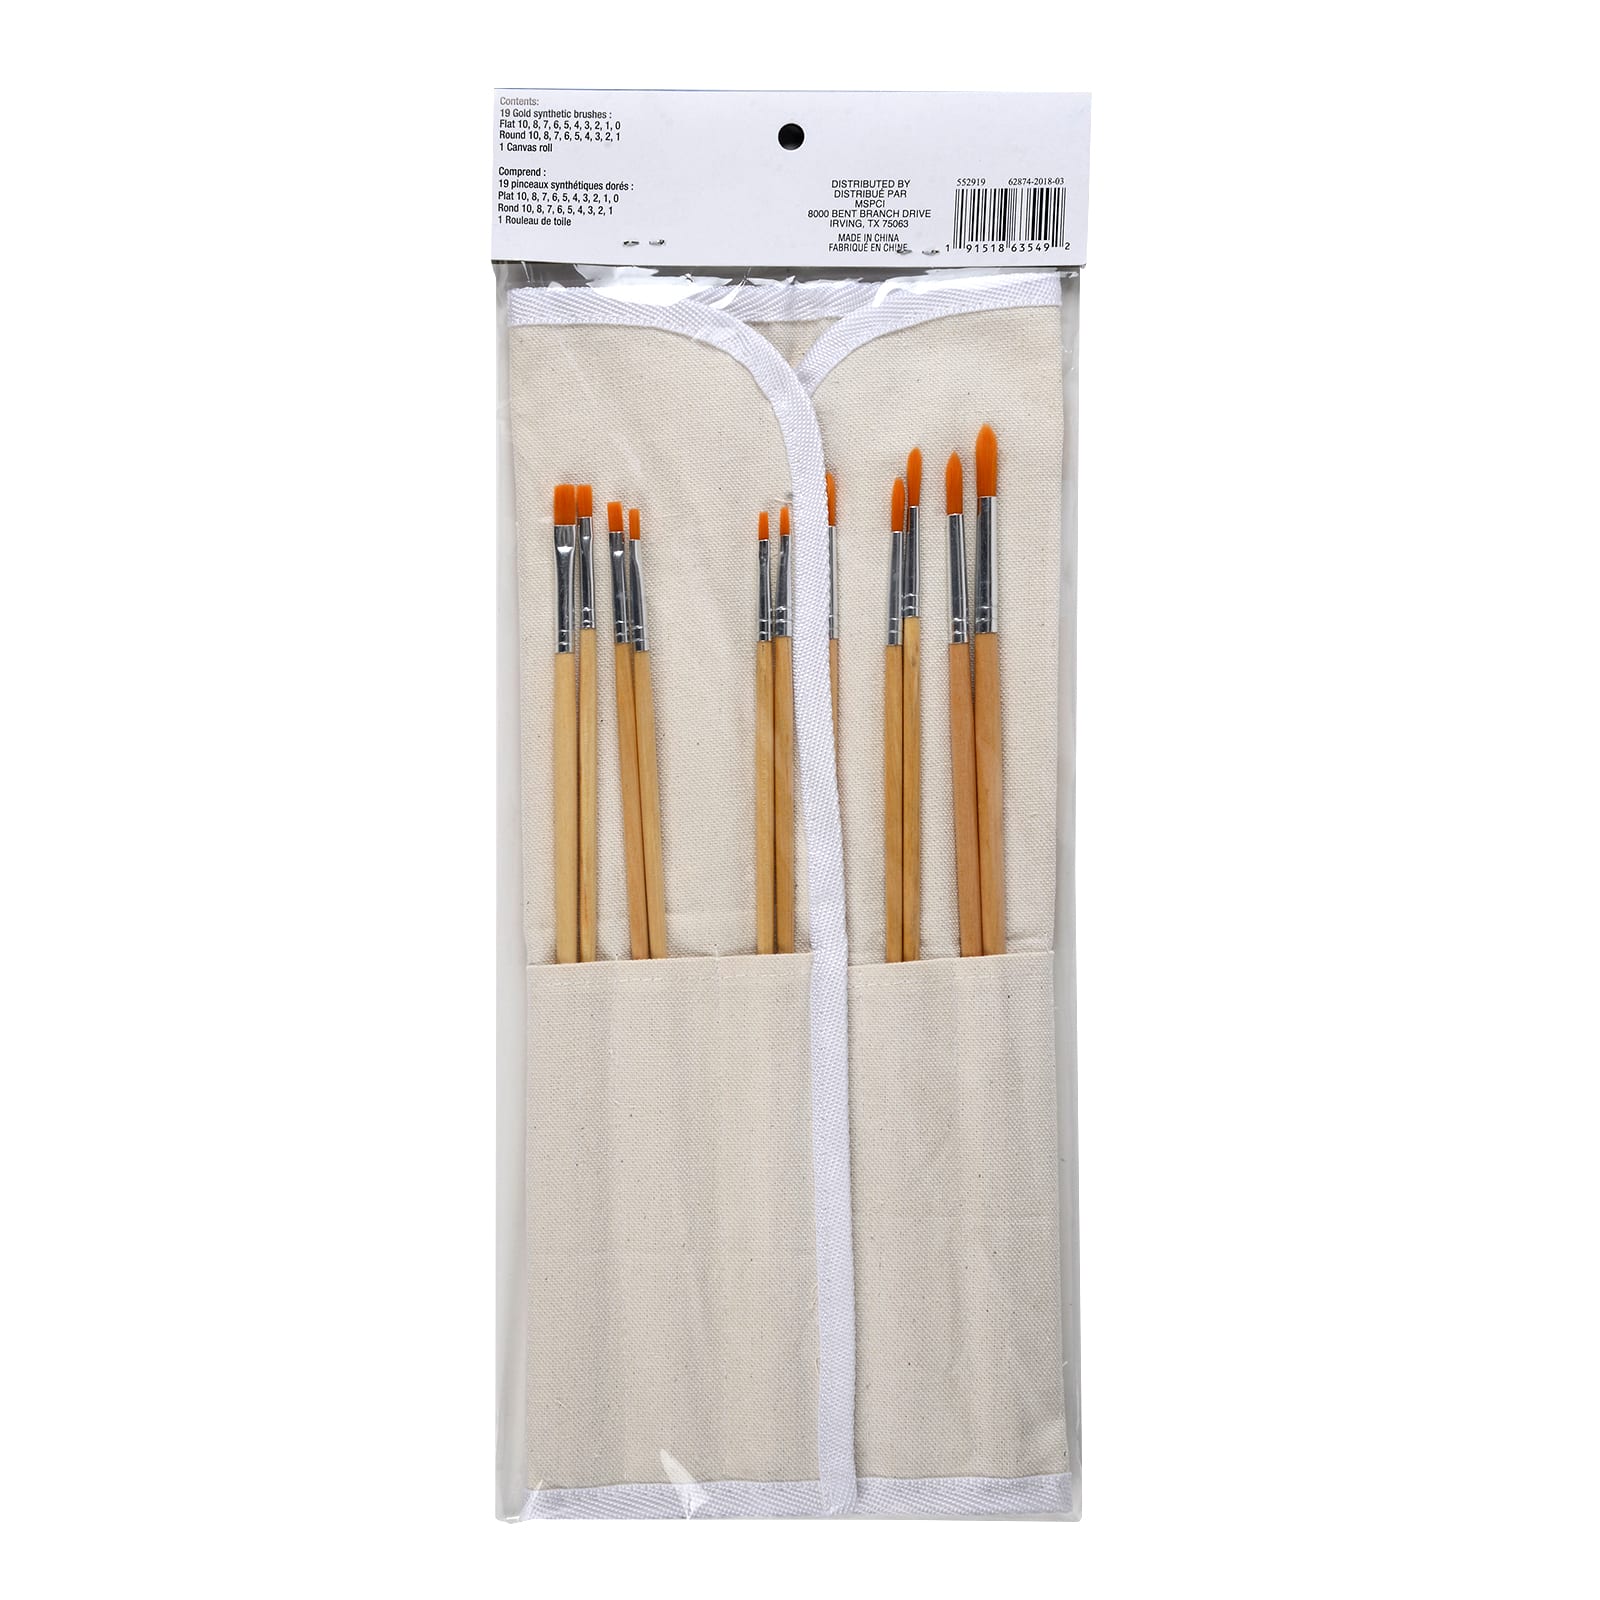 Artsmith Painting Supplies: Paint Brushes, Paper Pads & More